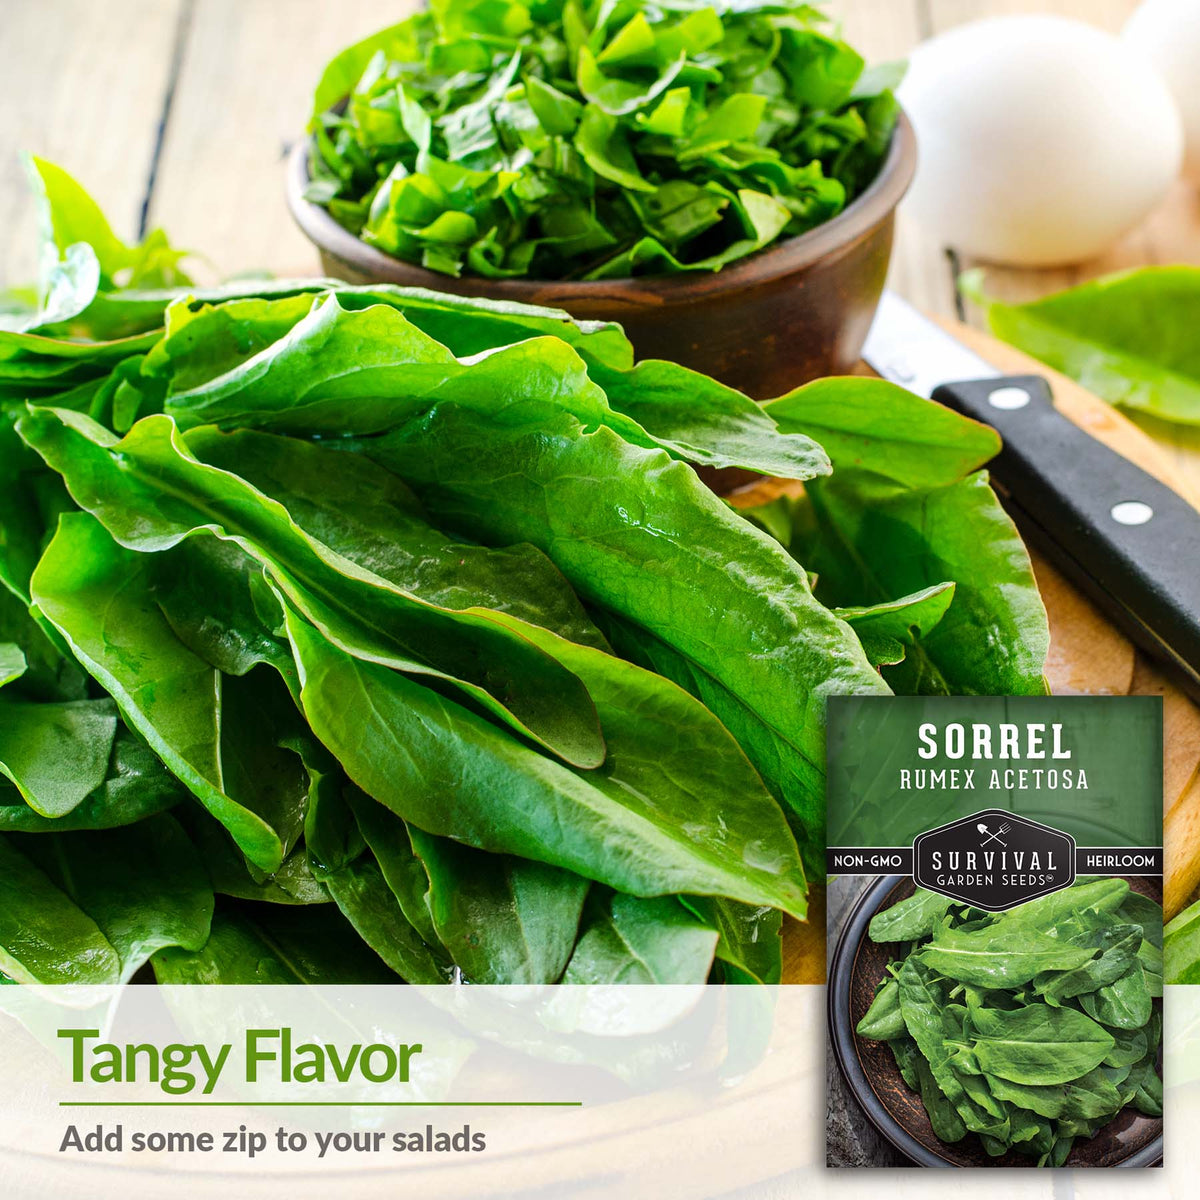 Sorrel adds a tangy zip to your salads